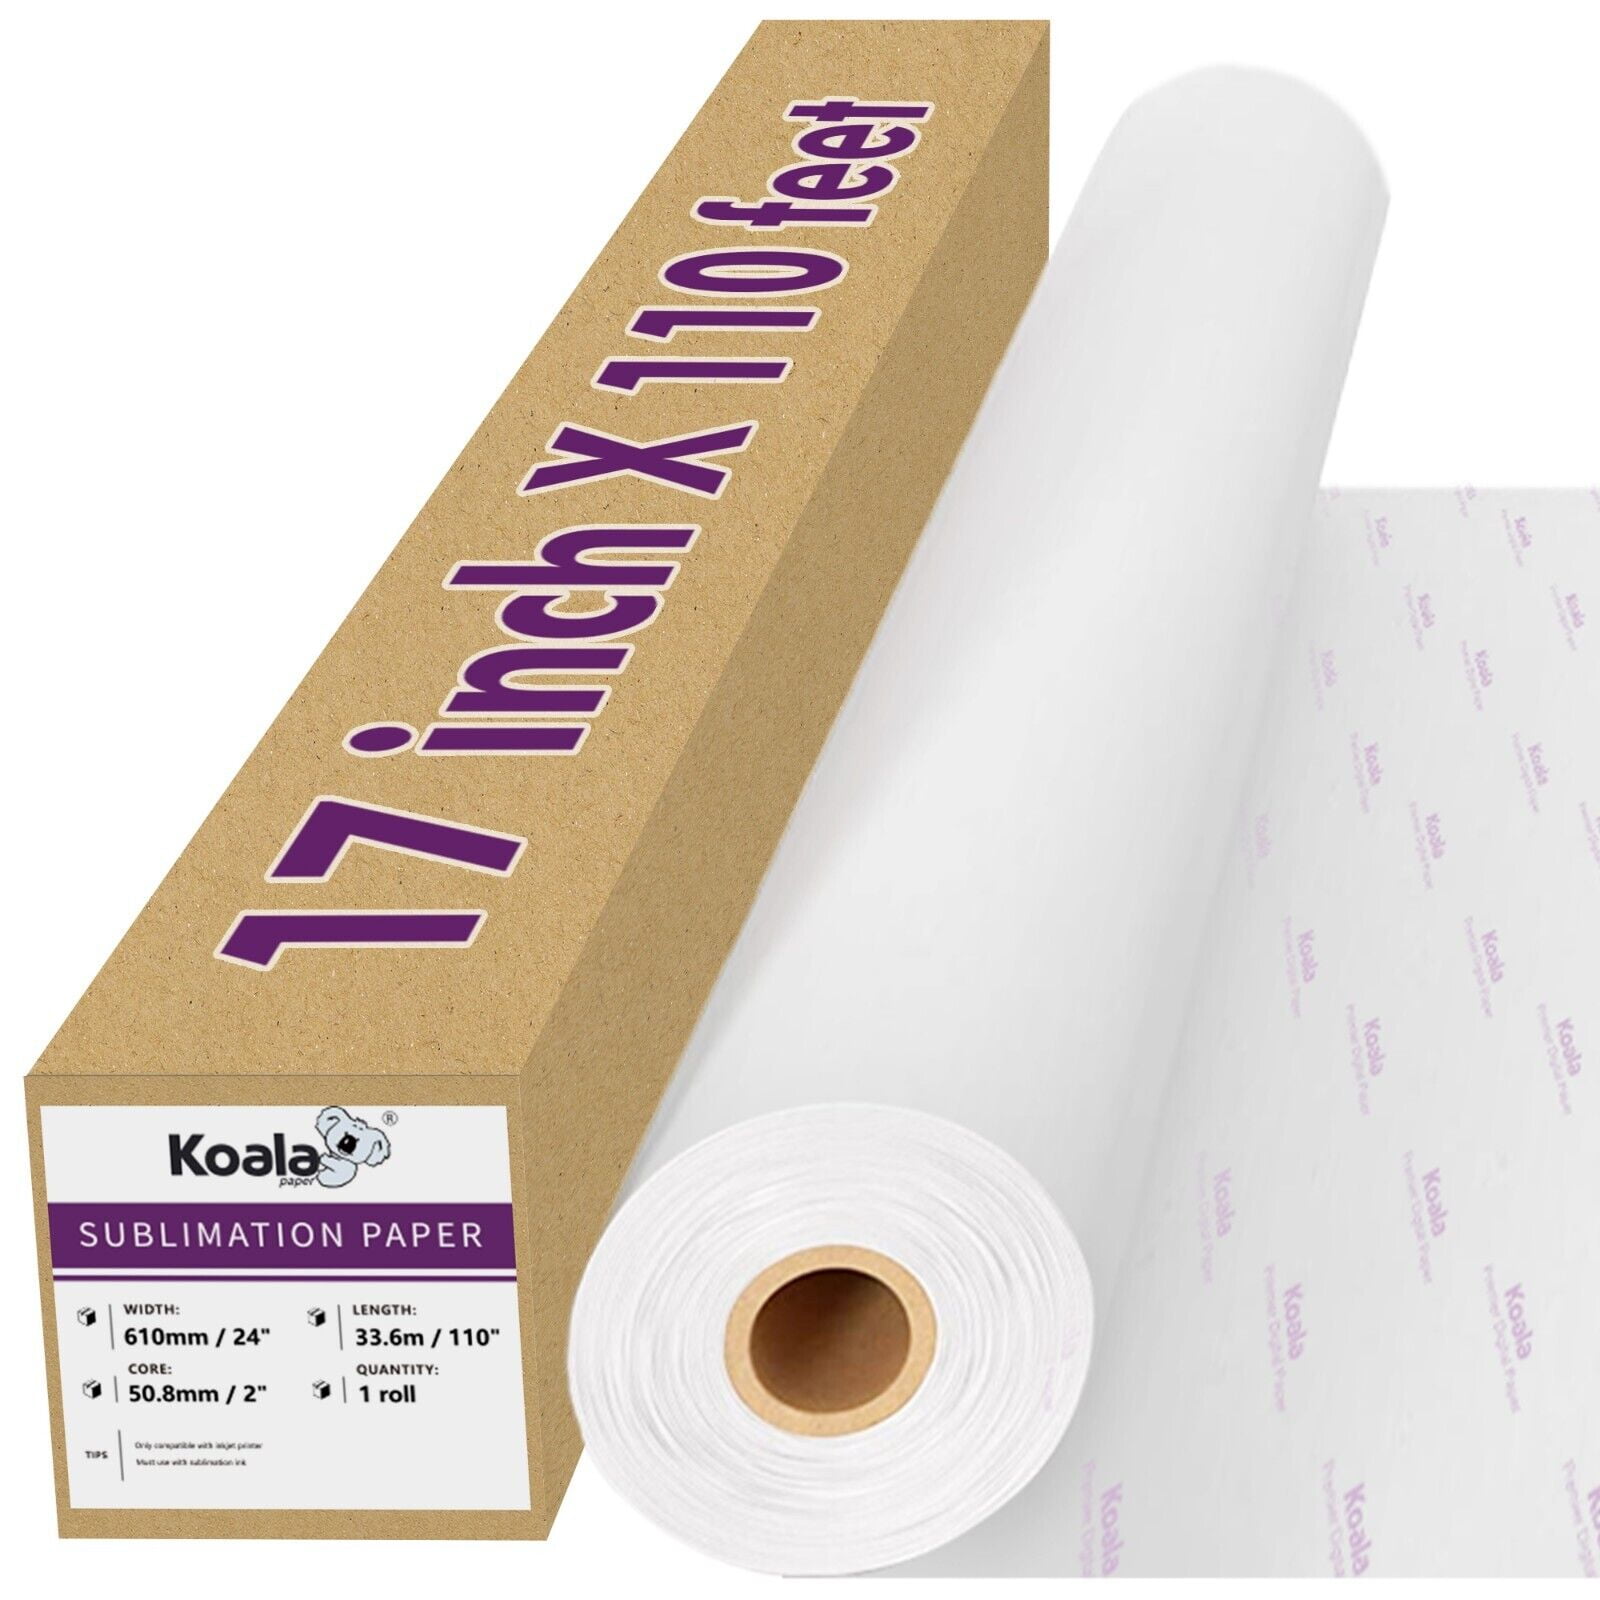 Propeel Heavy Stock 52 Banner Paper 10-Pack for Transfer Printers, Size: 550 8.5 x 49.6